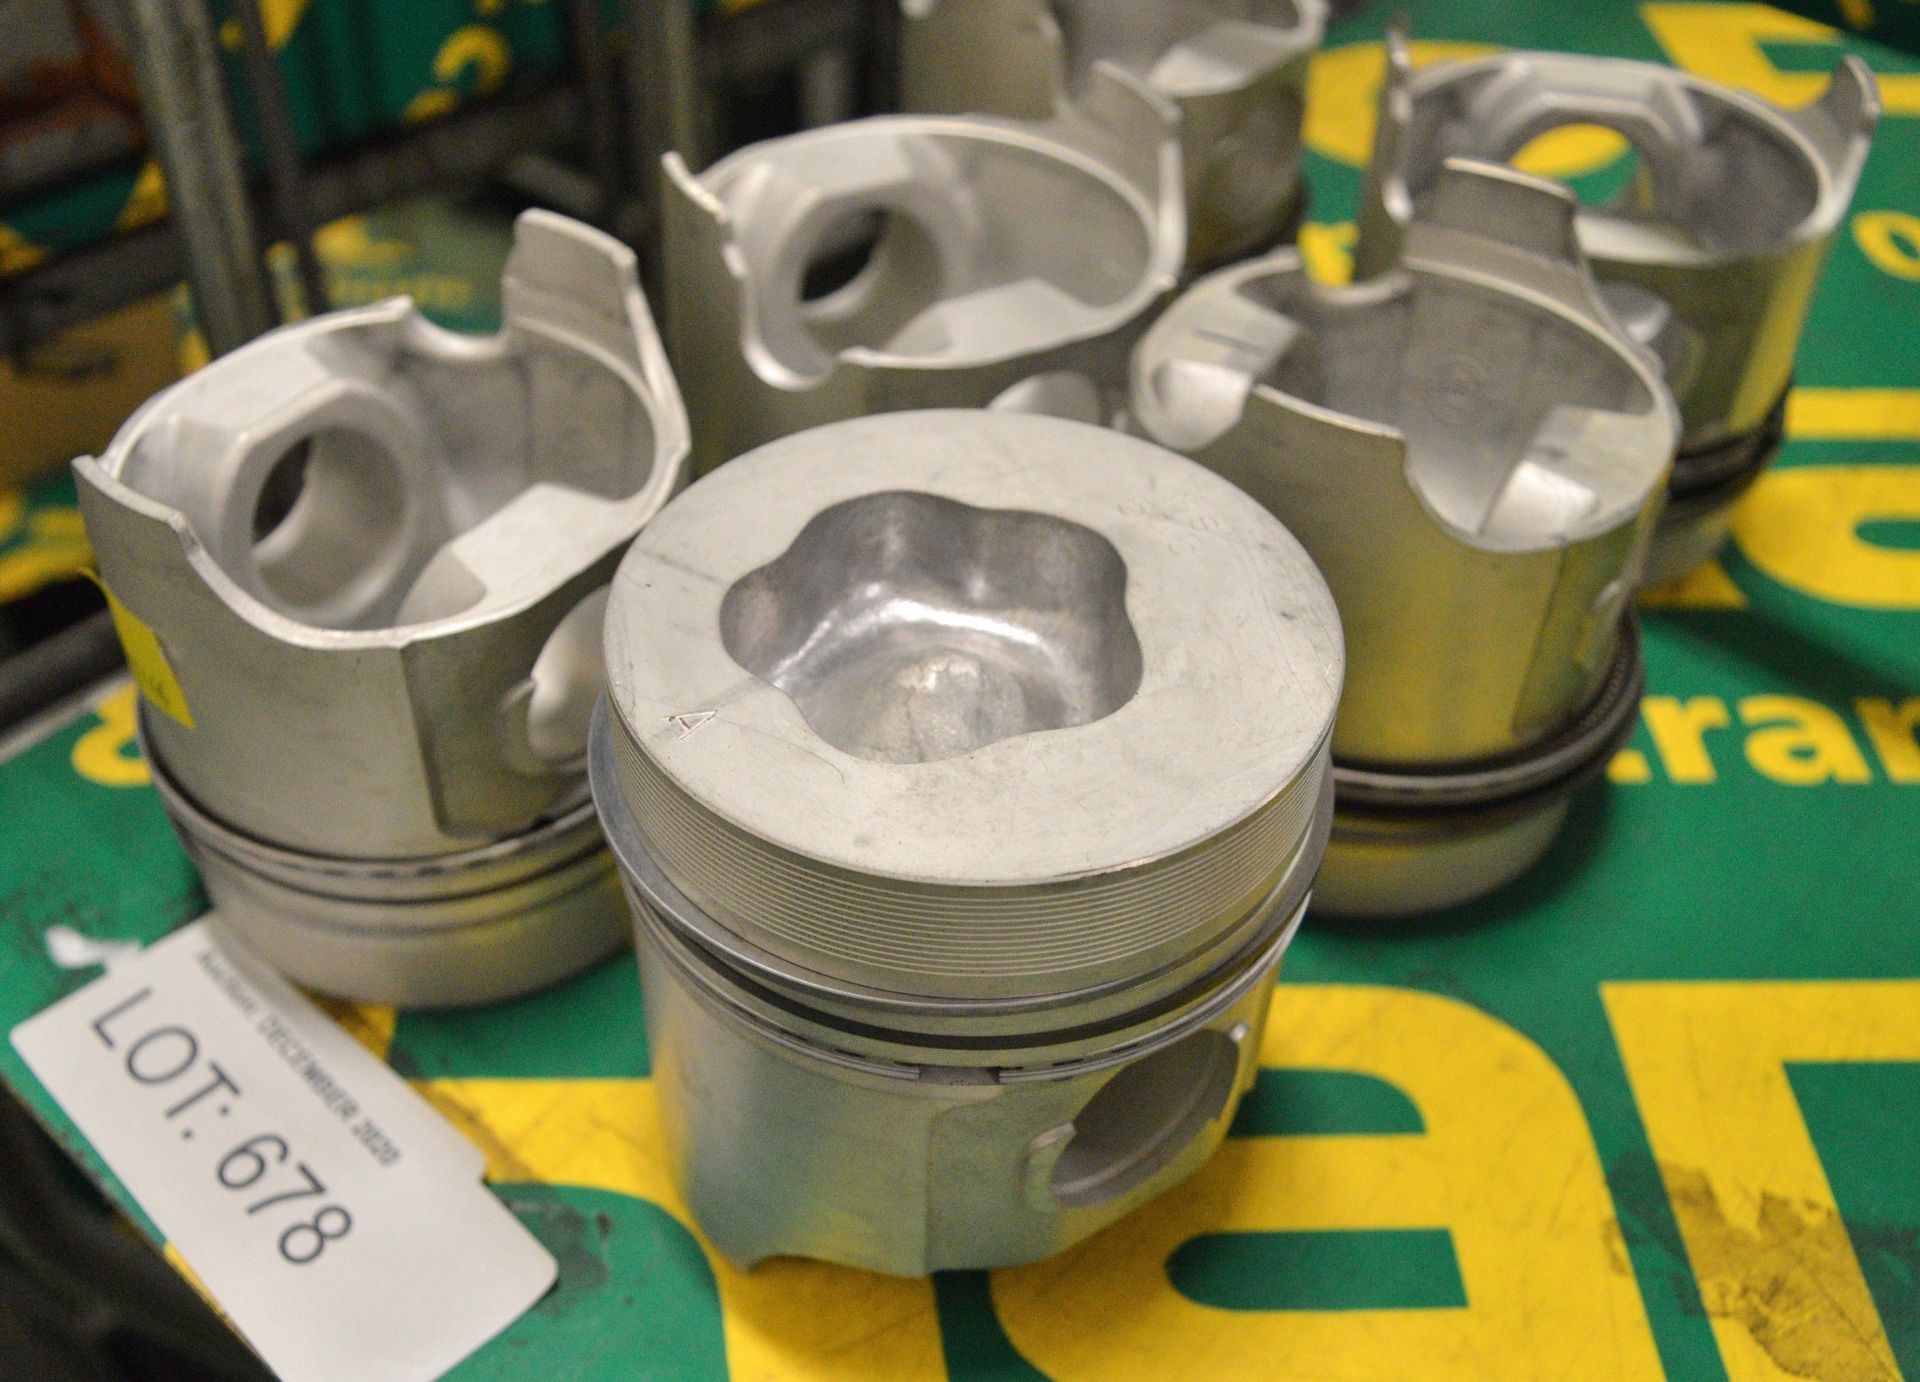 6x Piston Internal Combustion Engine parts - Image 3 of 3